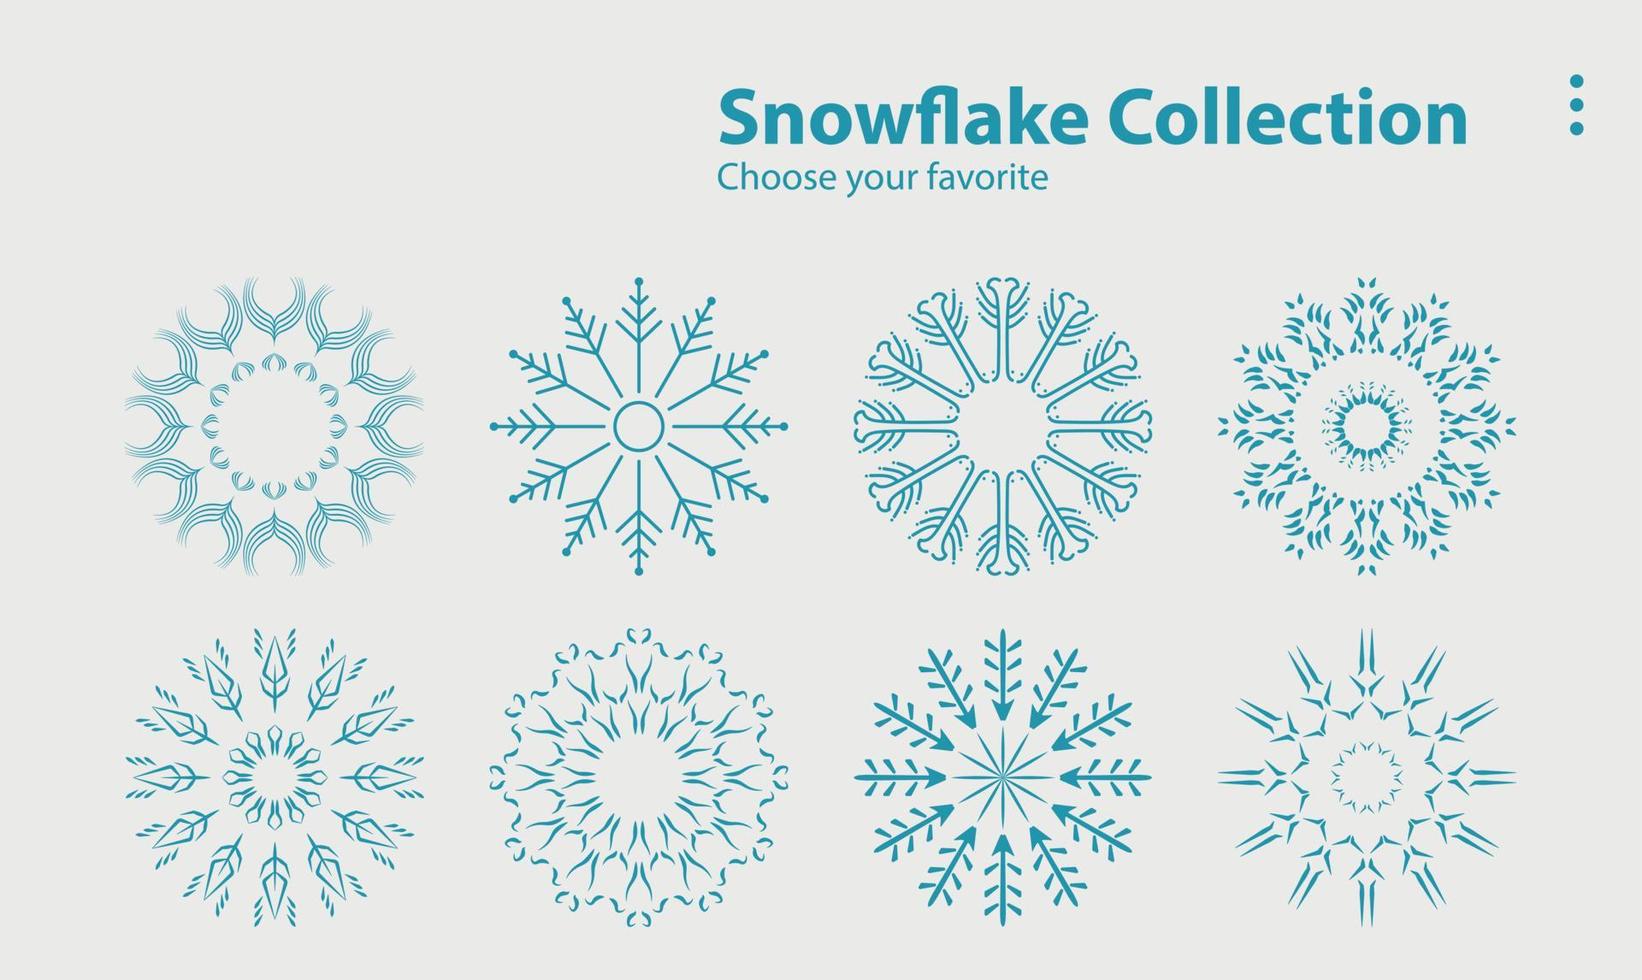 wallpaper background pattern template icon party cartoon poster flyer vector palette new year christmas merry happy season snow vintage cartoon cute snowflake joy collection winter holiday gift card